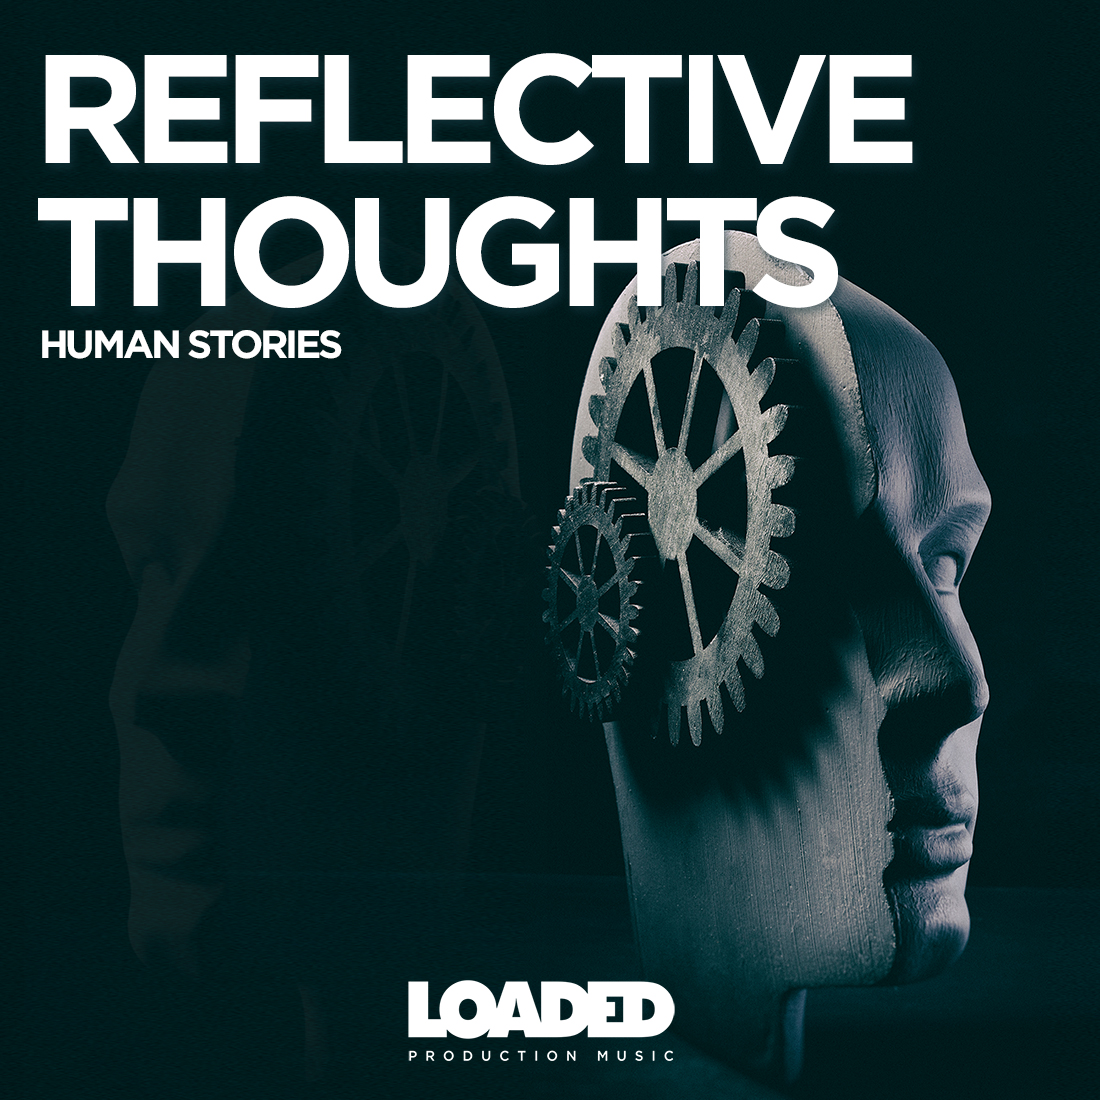 LPM 147 - Reflective Thoughts - Album Cover